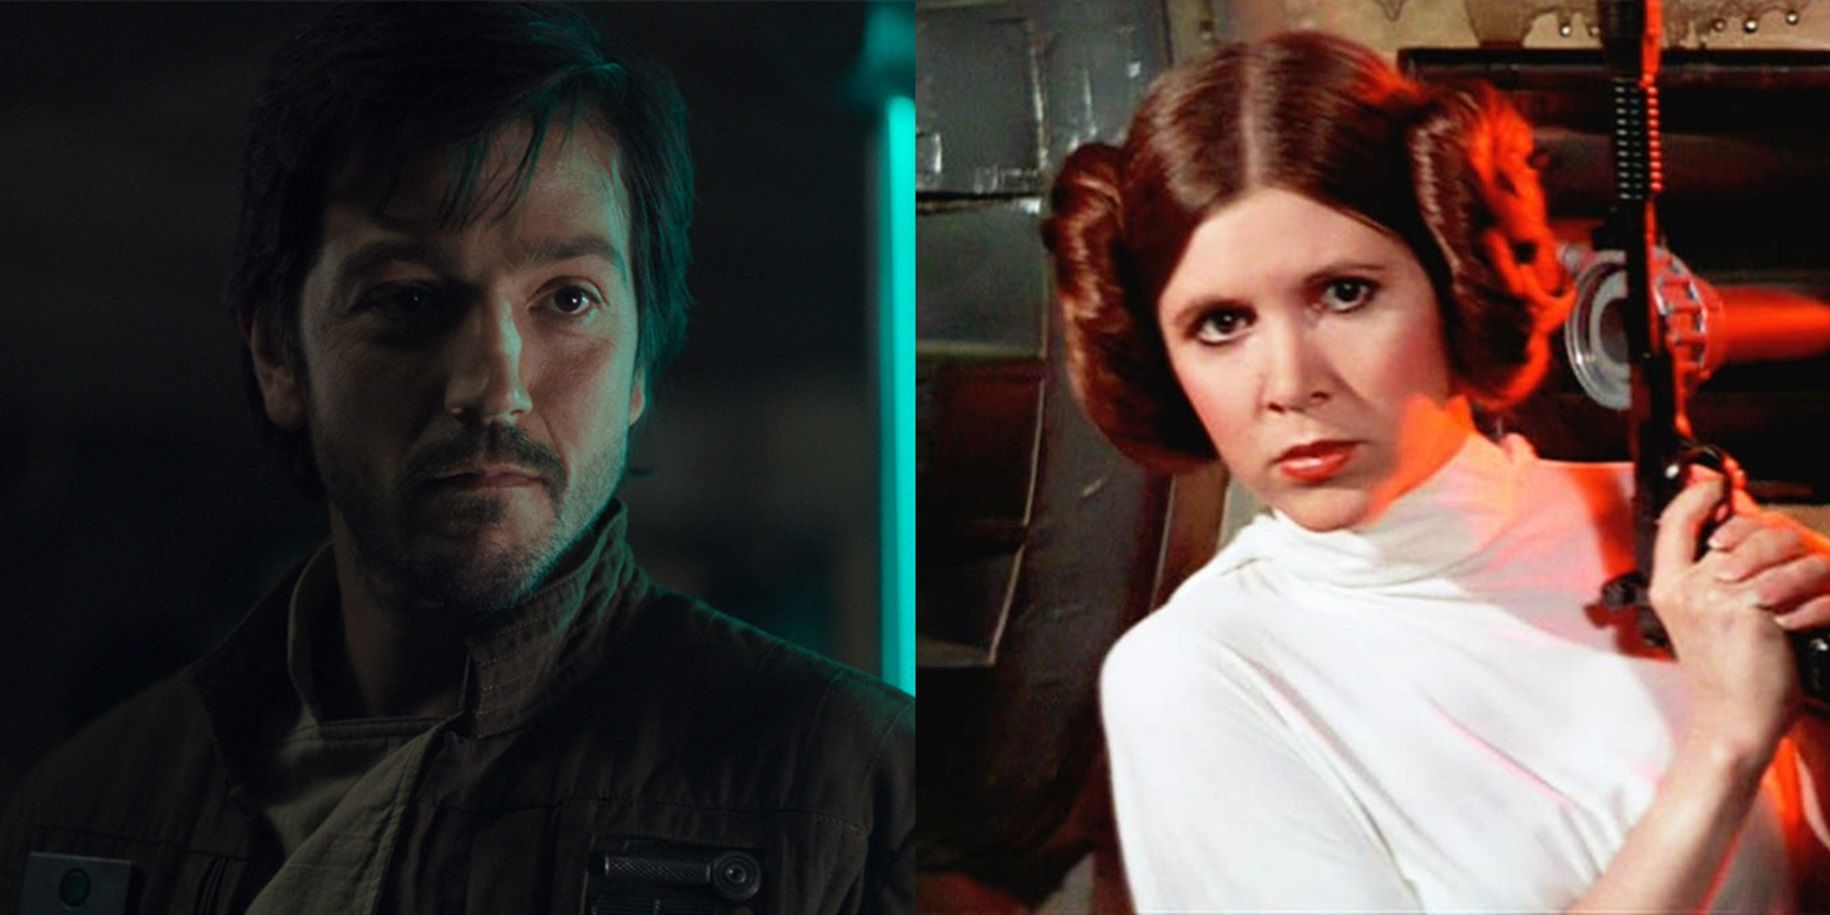 Split_image_of_Cassian_Andor_in_Rogue_One_and_Leia_Organa_with_a_blaster_in_Star_Wars